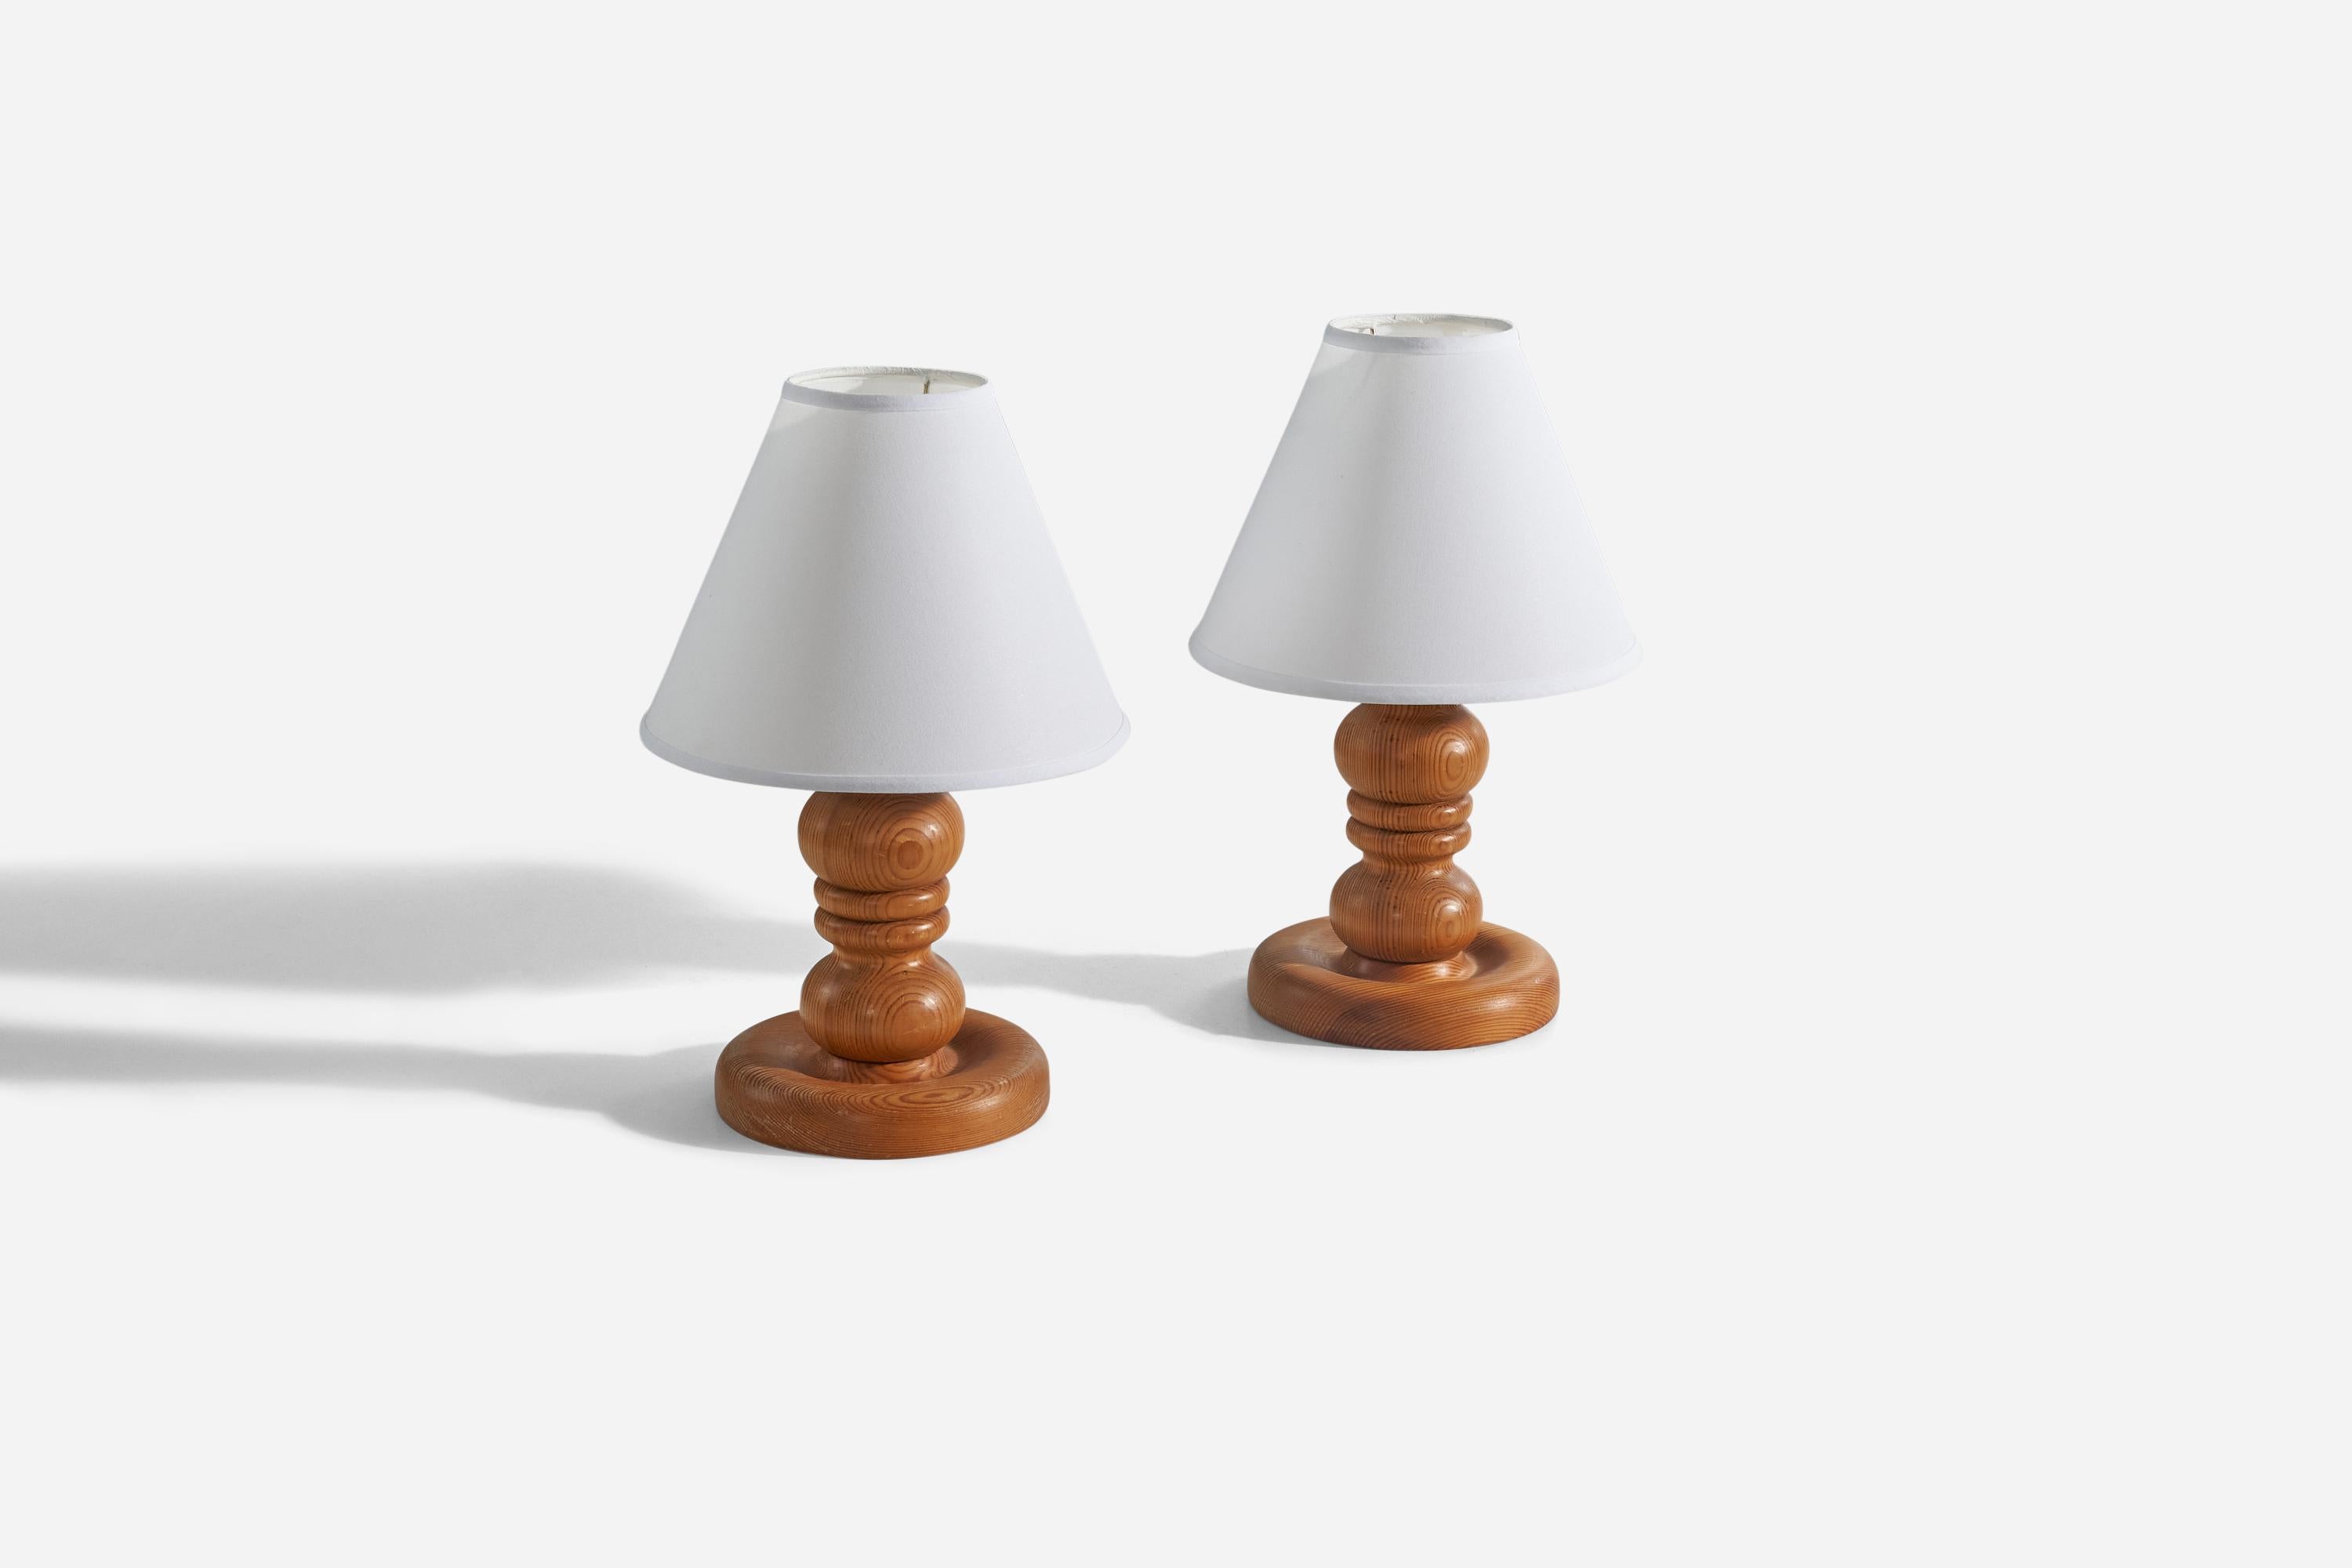 A pair of pine table lamps designed and produced in Sweden, 1970s. 

Sold without lampshades. 
Dimensions of lamp (inches) : 11.06 x 7 x 7 (H x W x D)
Dimensions of shade (inches) : 4.25 x 10.25 x 8 (T x B x S)
Dimension of lamp with shade